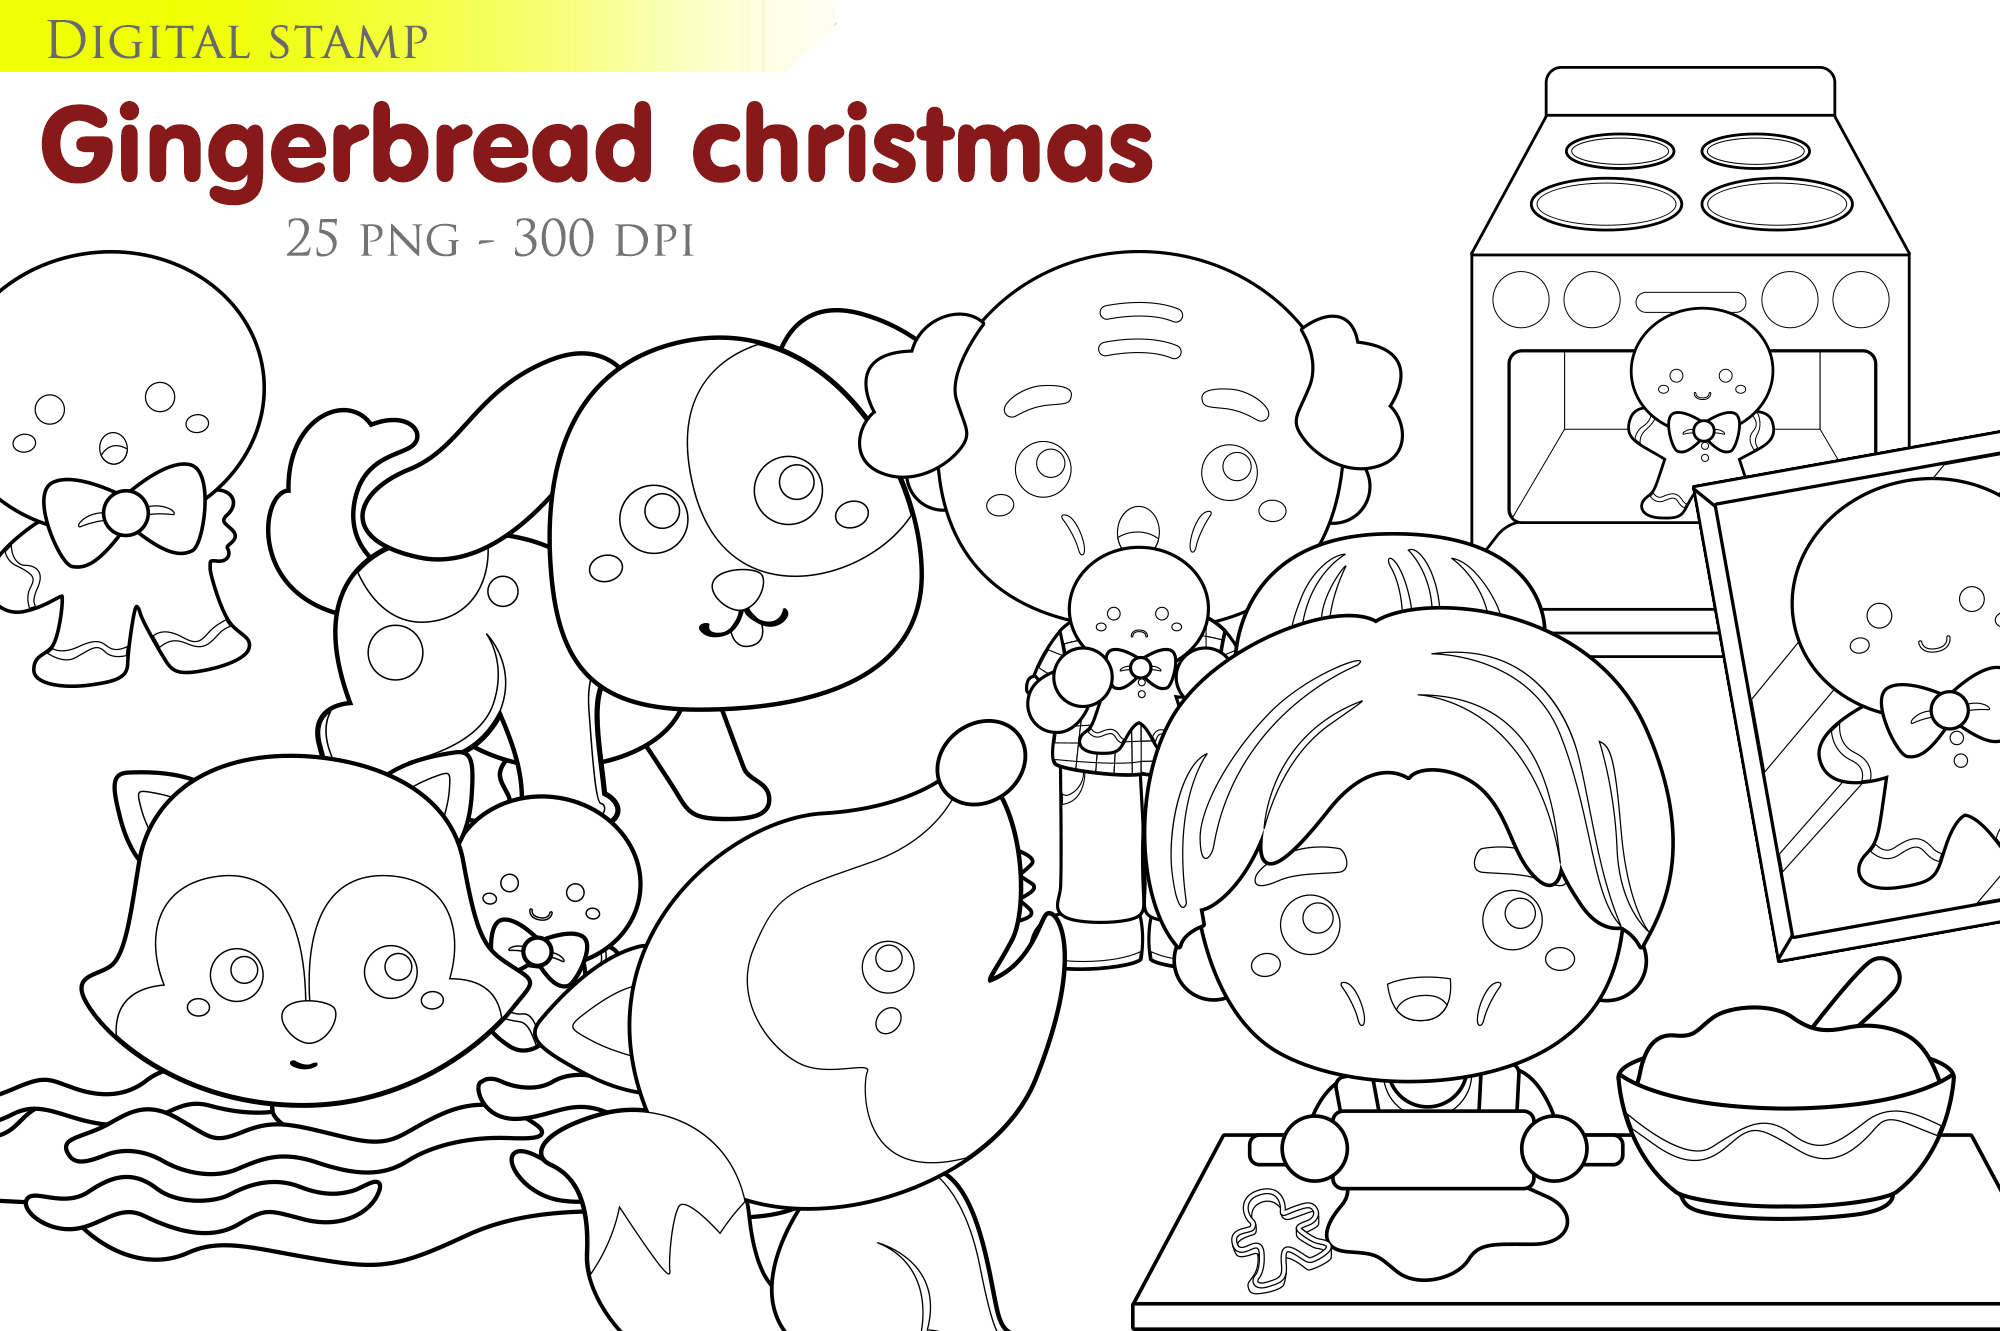 Gingerbread christmas coloring page.